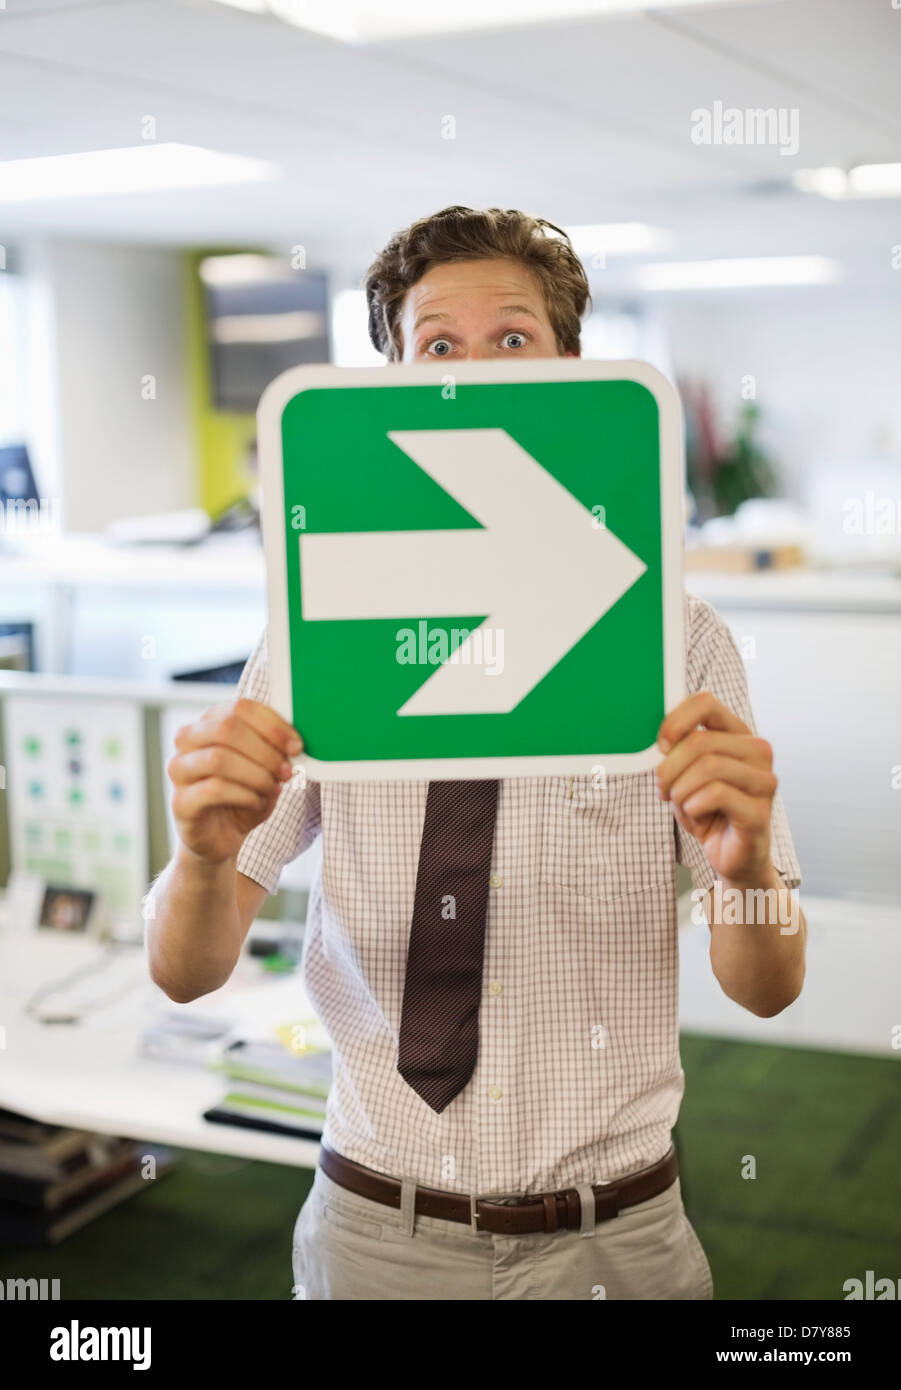 Businessman holding arrow sign in office Stock Photo